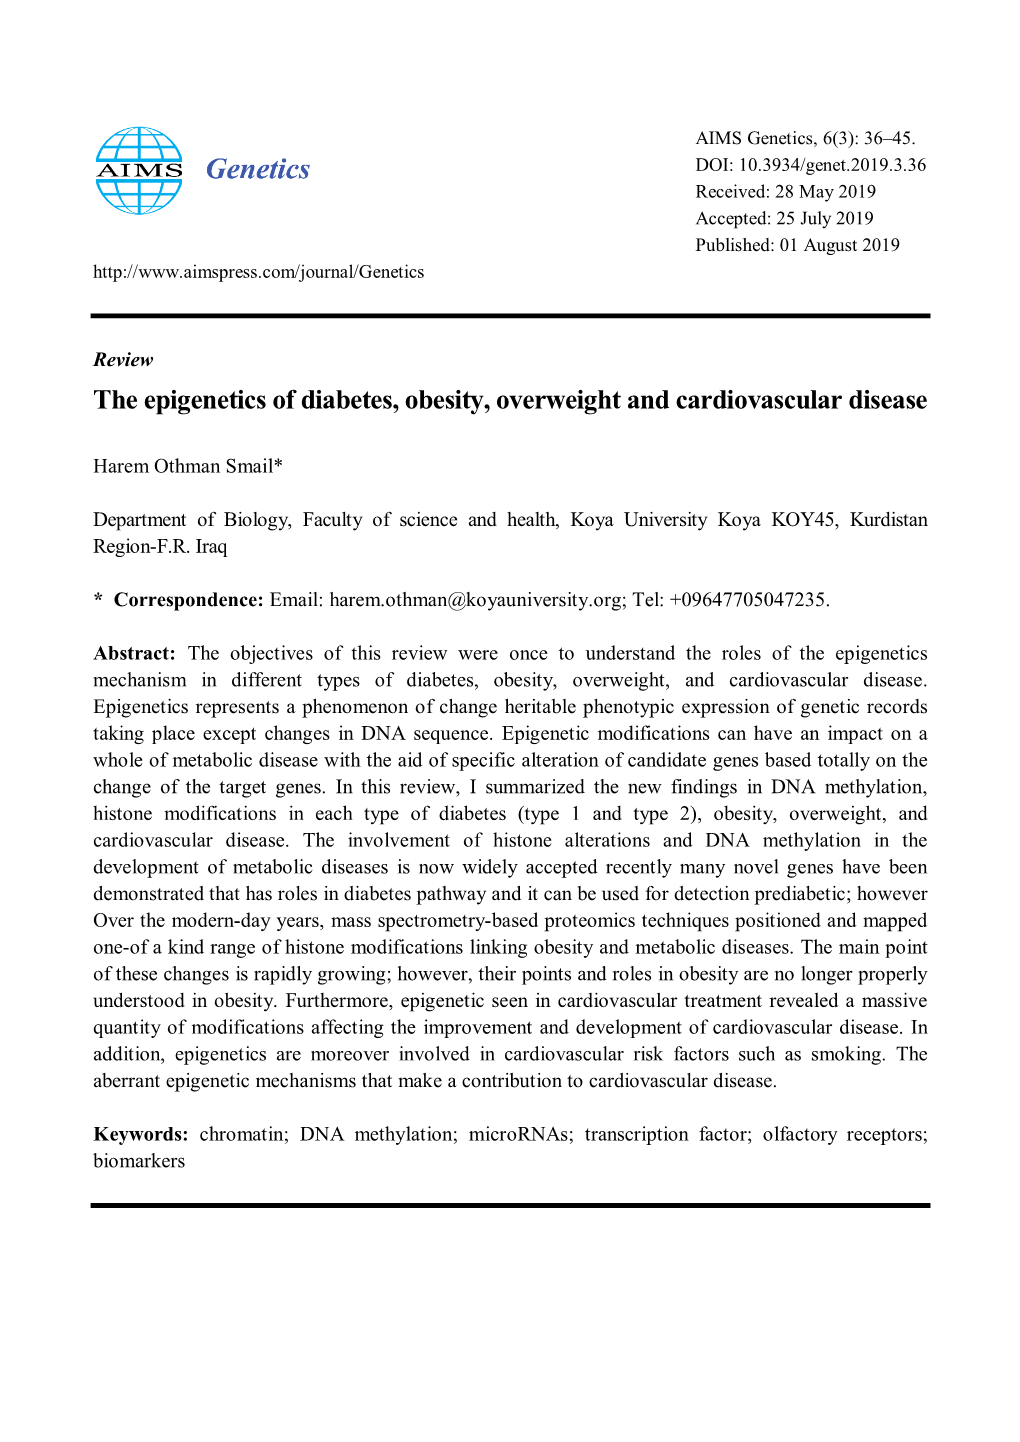 The Epigenetics of Diabetes, Obesity, Overweight and Cardiovascular Disease